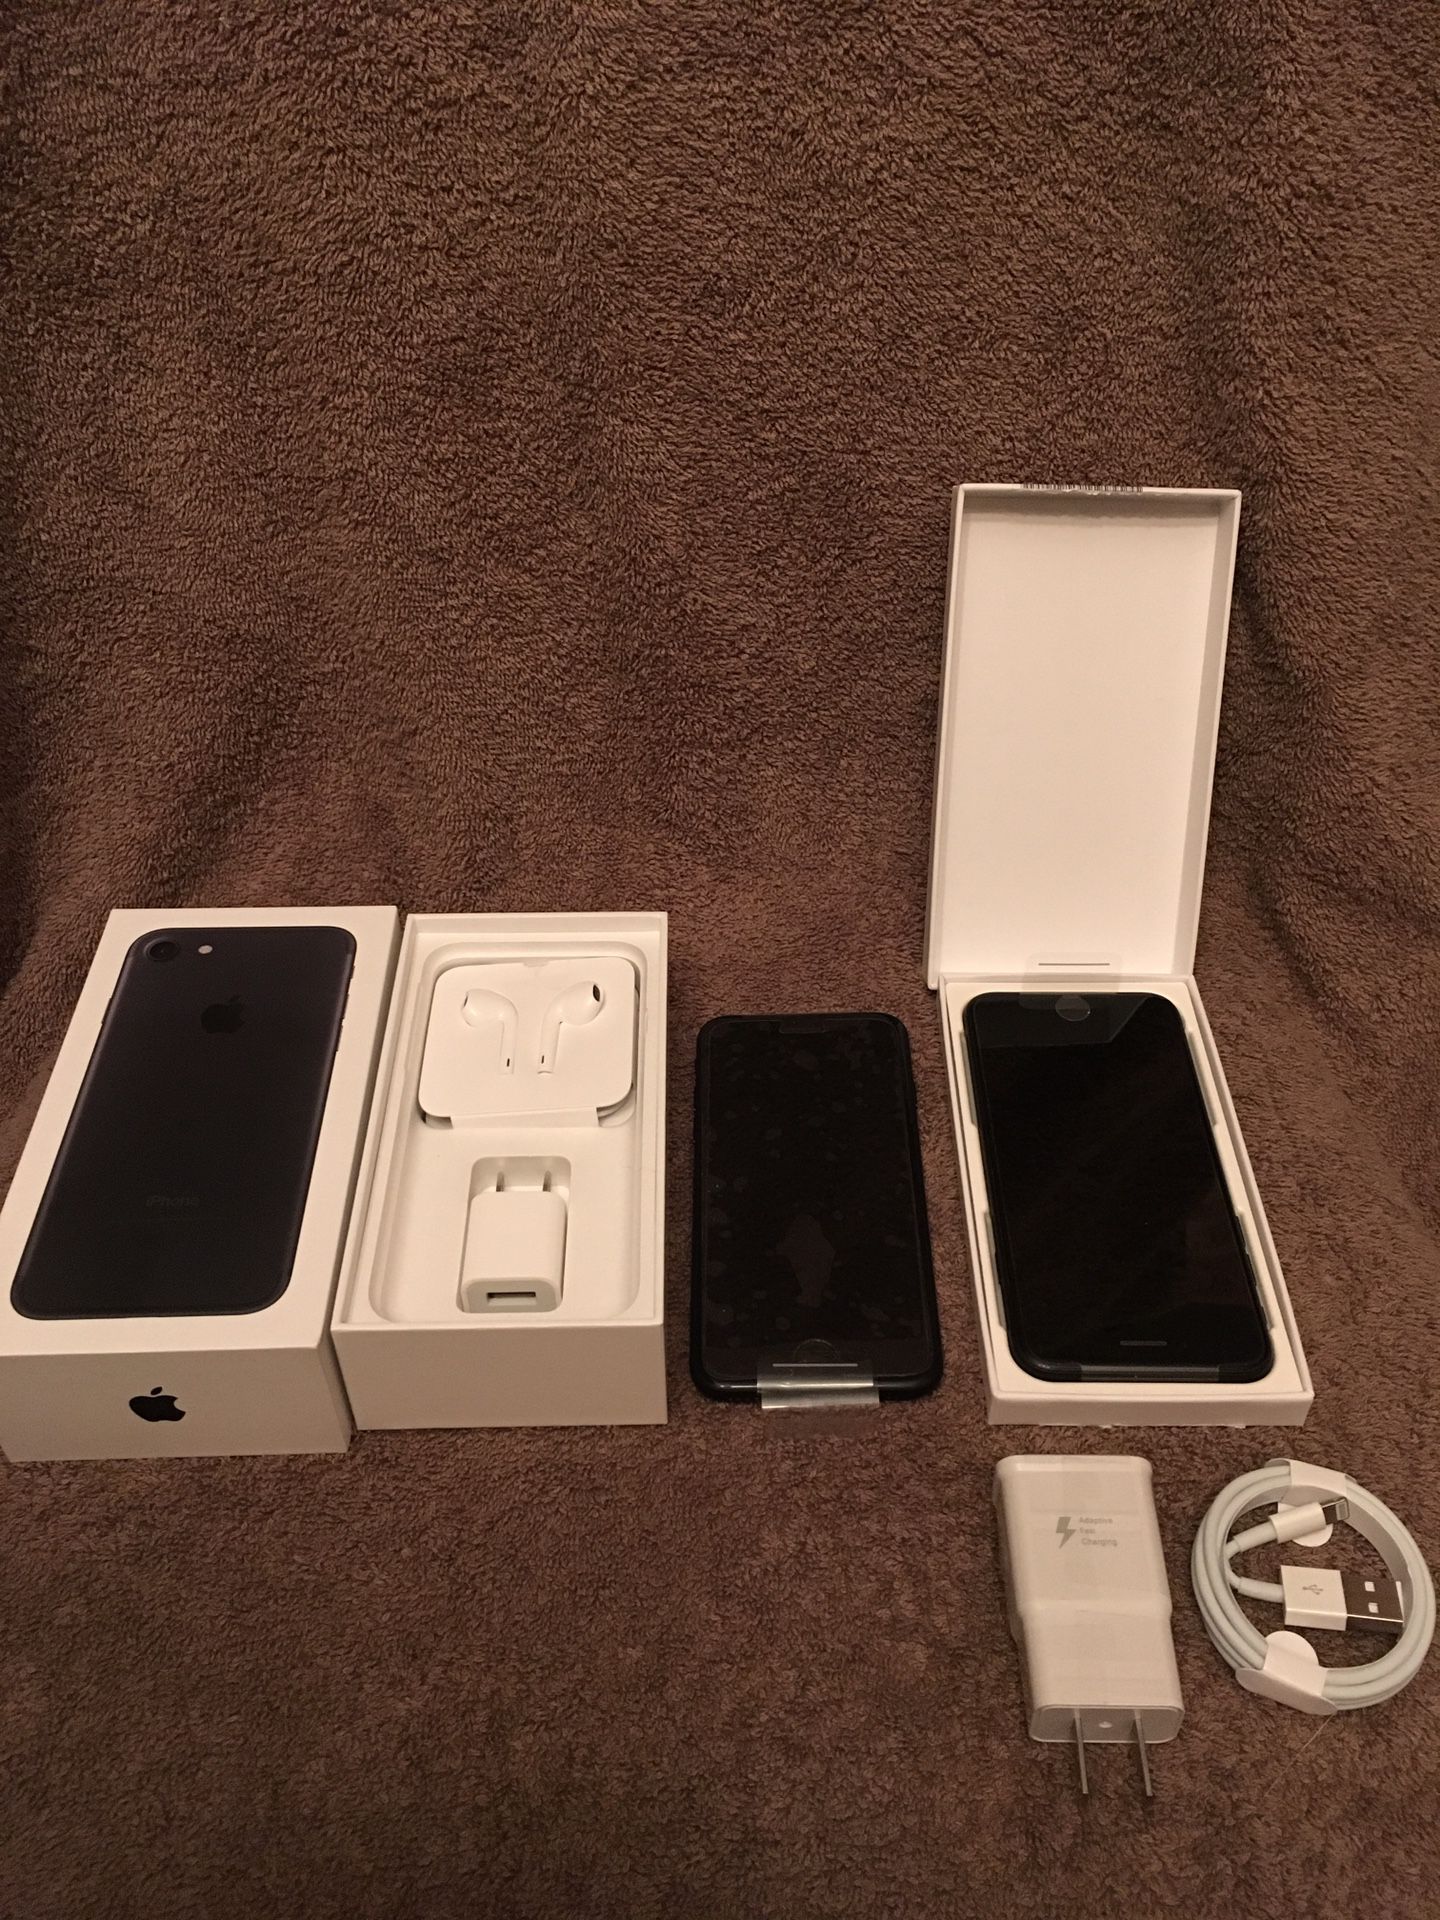 iPhone 7 128 GB and 32 GB